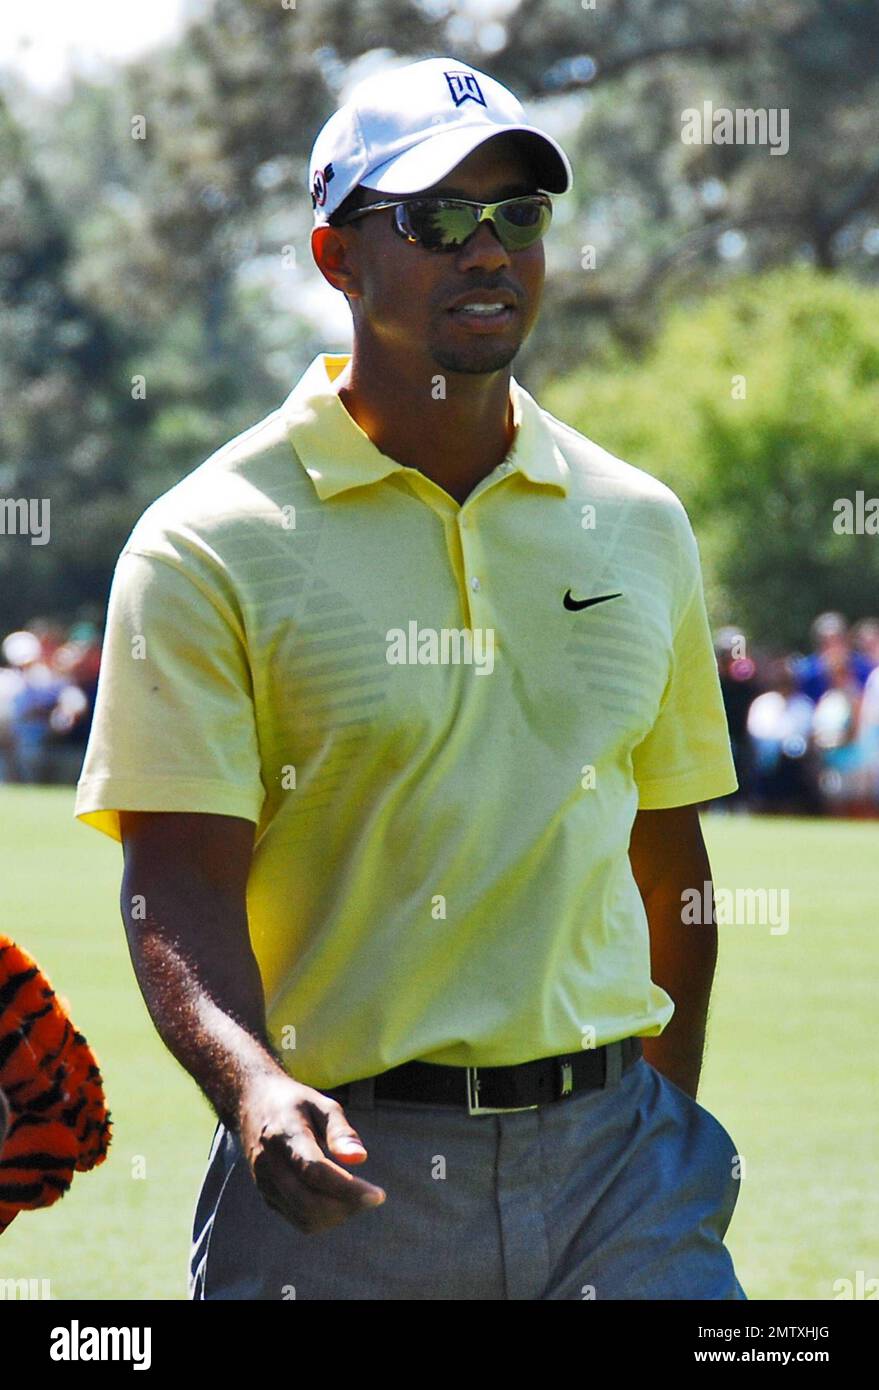 Tiger Woods on the golf course taking time for a practice run during the 2010 Masters Golf Tournament.  This marks Tiger's first time playing golf publicly since news broke about his extramarital affairs in November 2009. Augusta, GA. 04/06/10.   . Stock Photo